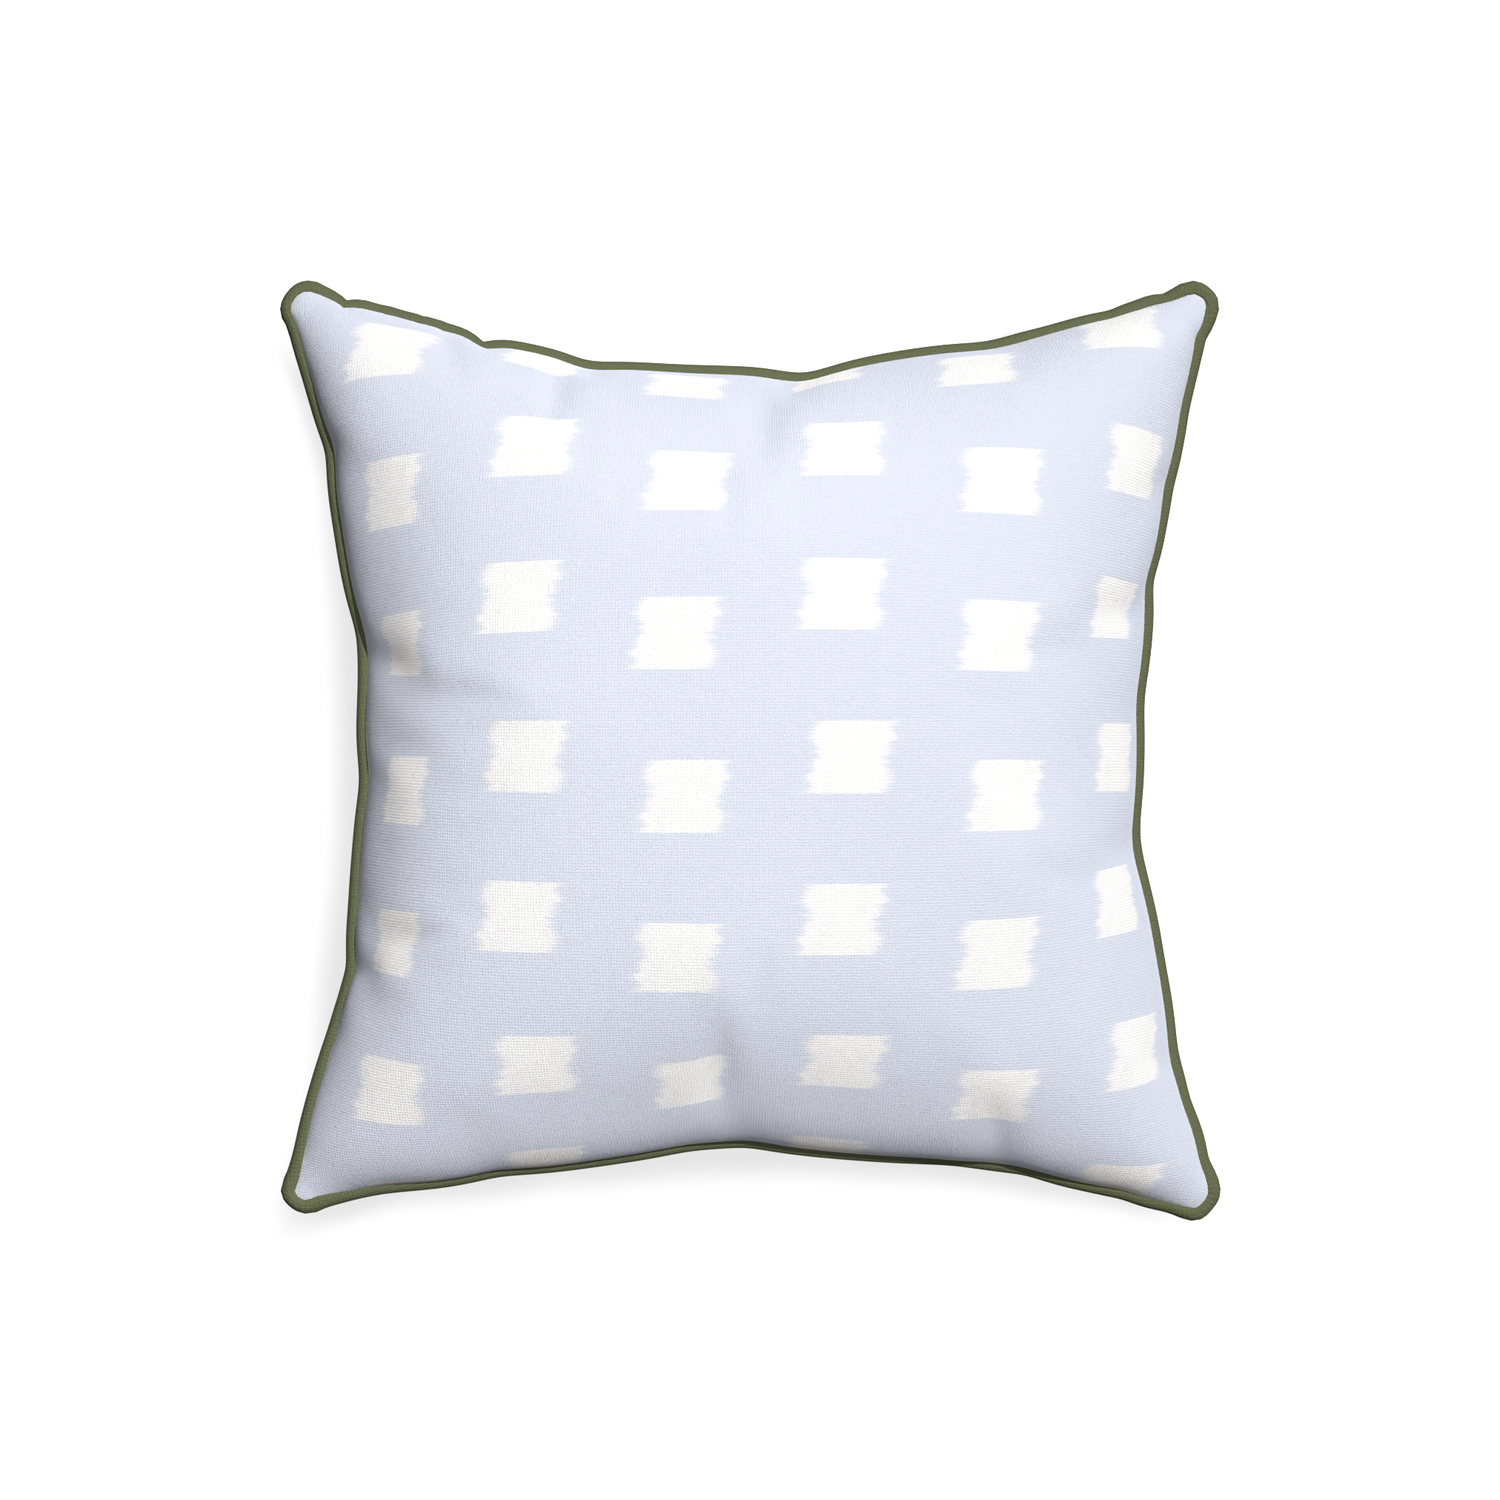 20-square denton custom sky blue patternpillow with f piping on white background